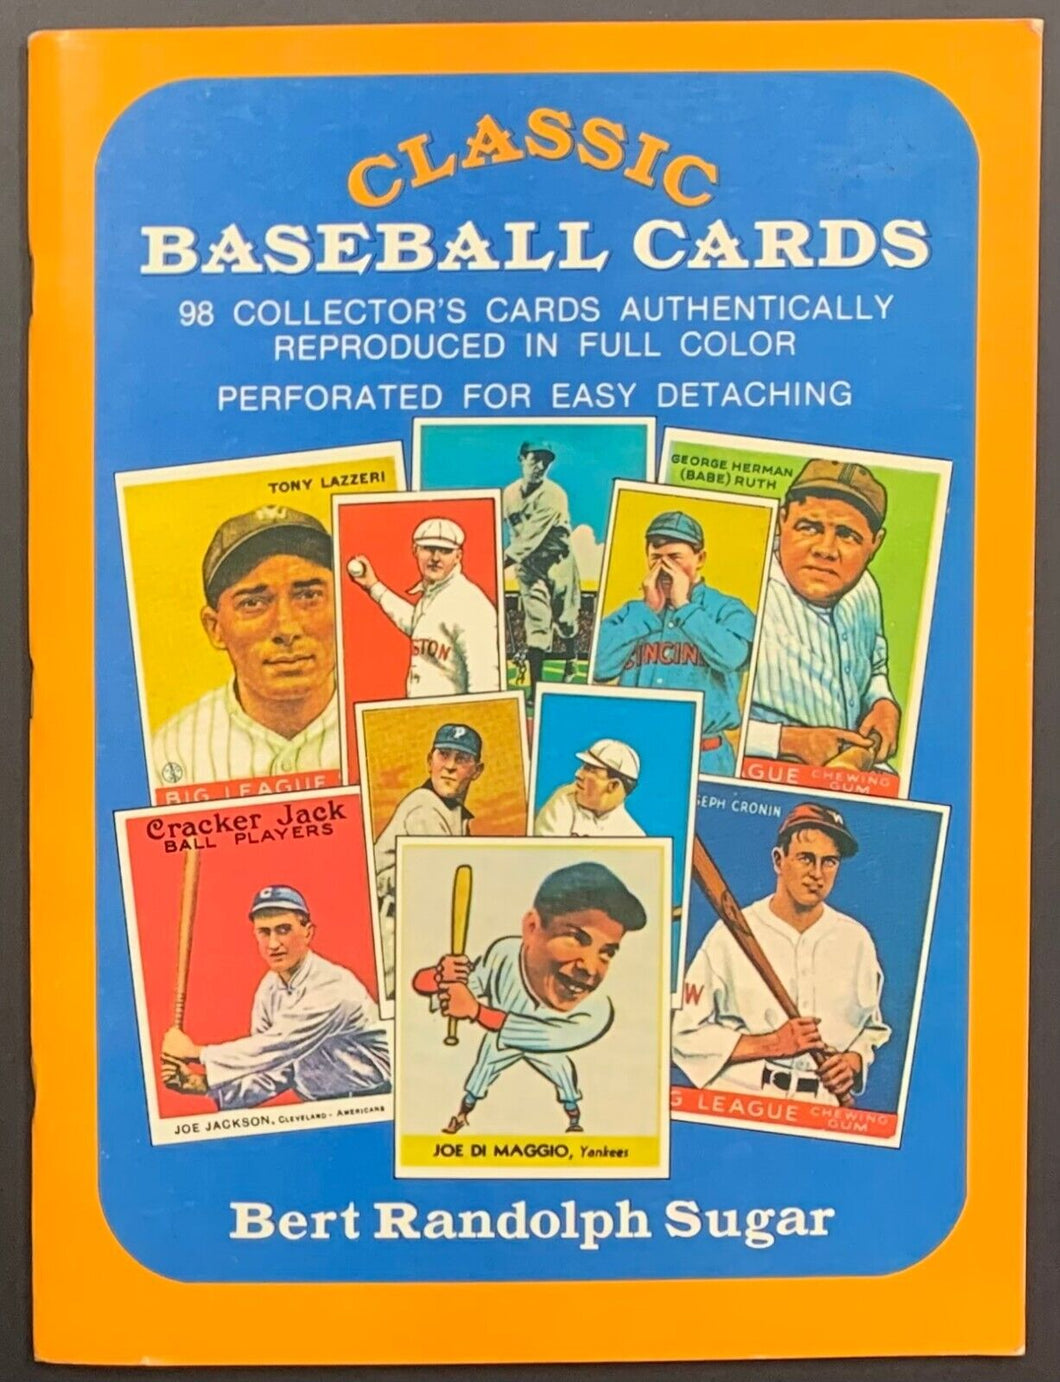 1977 Classic Baseball Cards Authentically Reproduced In Full Color Babe Ruth